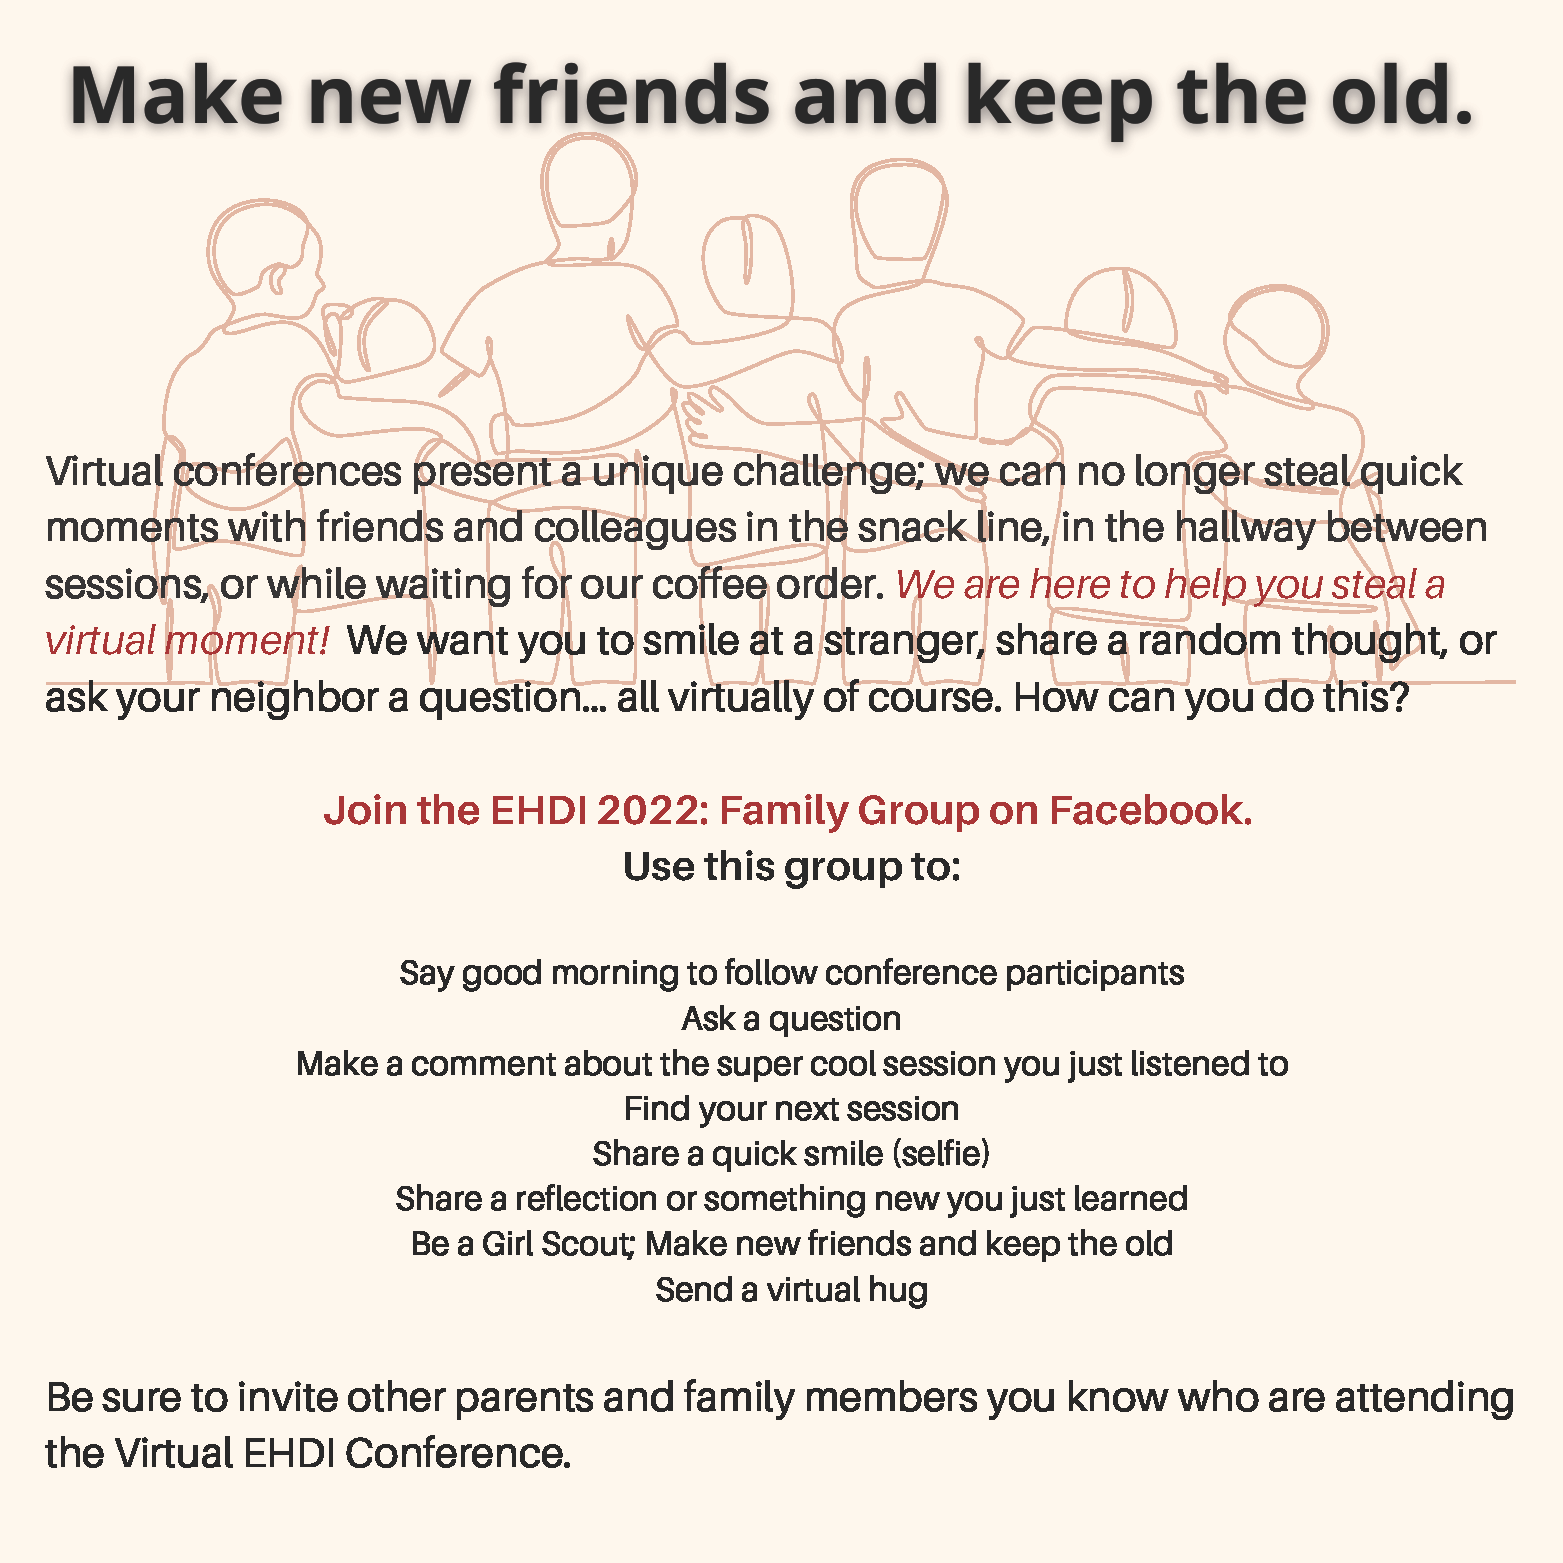 Make new friends and keep the old. Join the EHDI 2022: Family Group on Facebook.